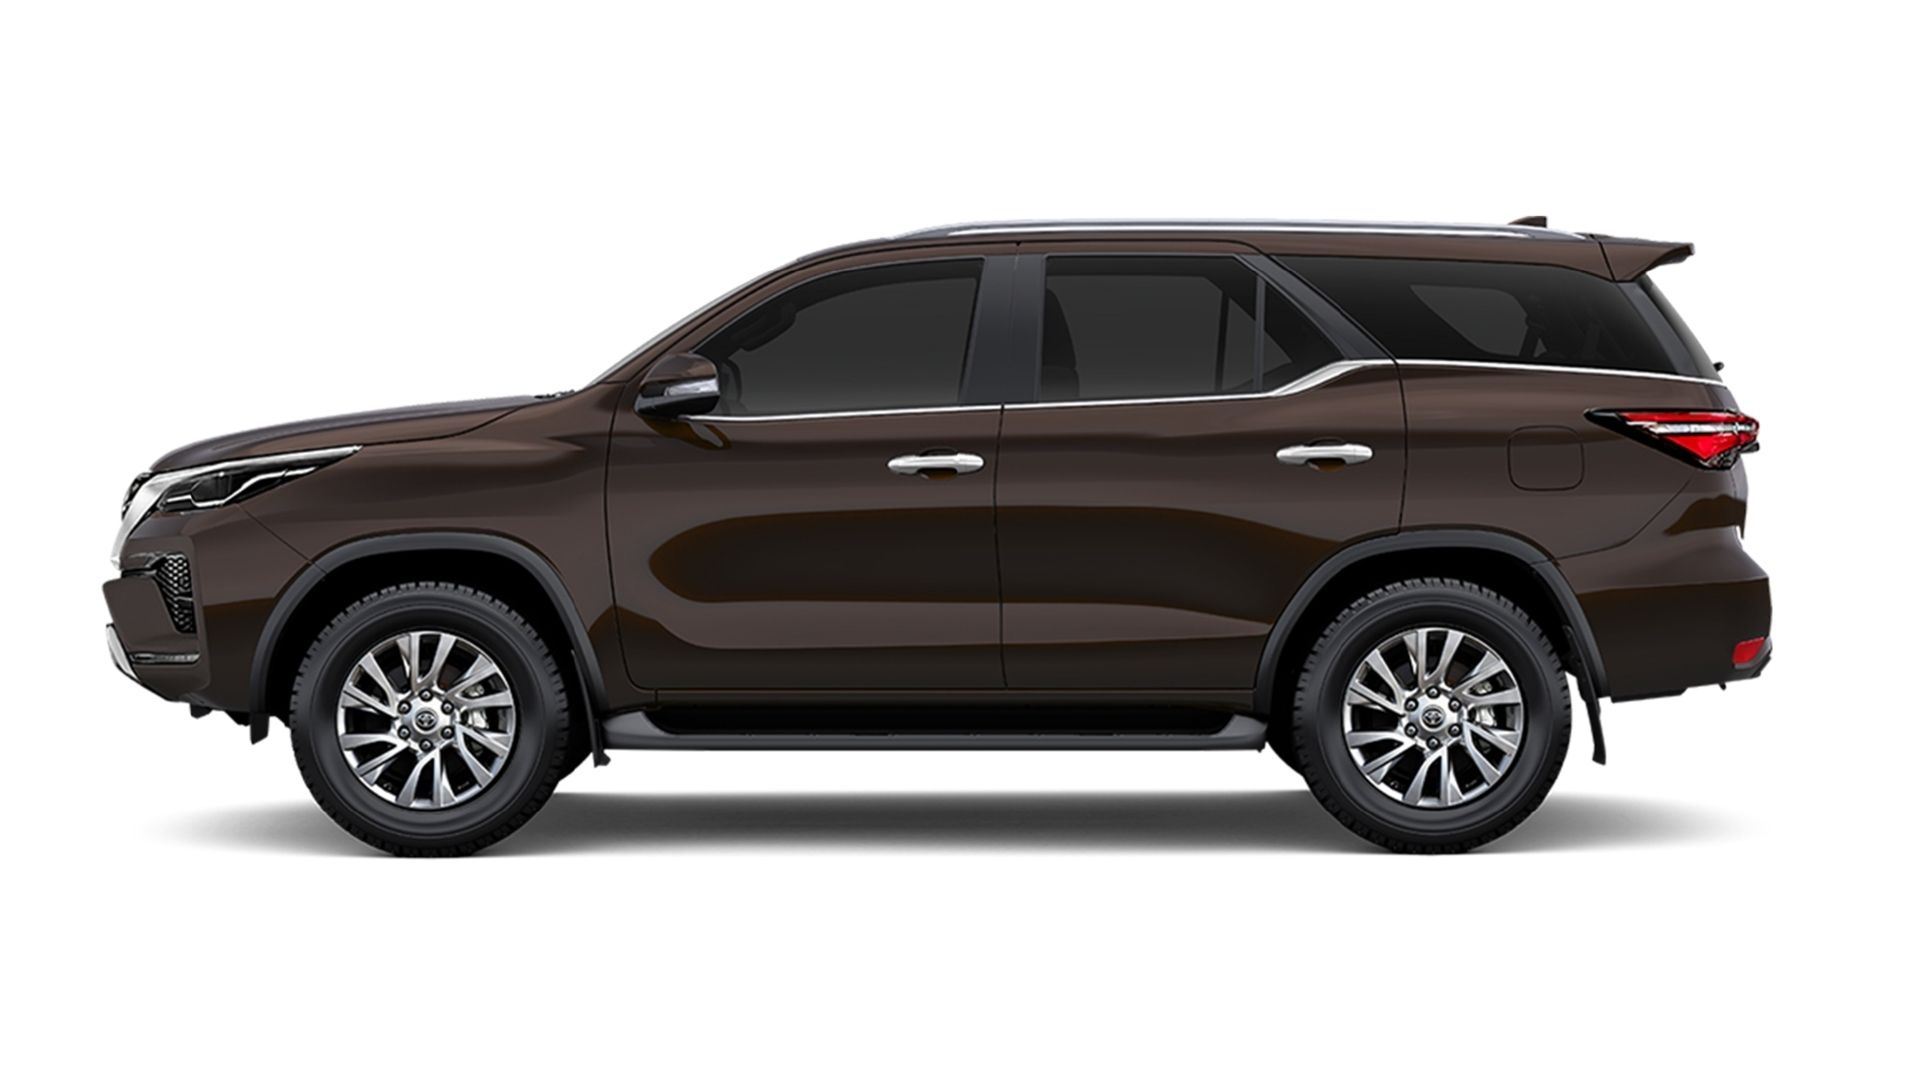 Toyota Fortuner Sigma 4 2018 Price (incl. GST) in India,Ratings, Reviews, Features and more